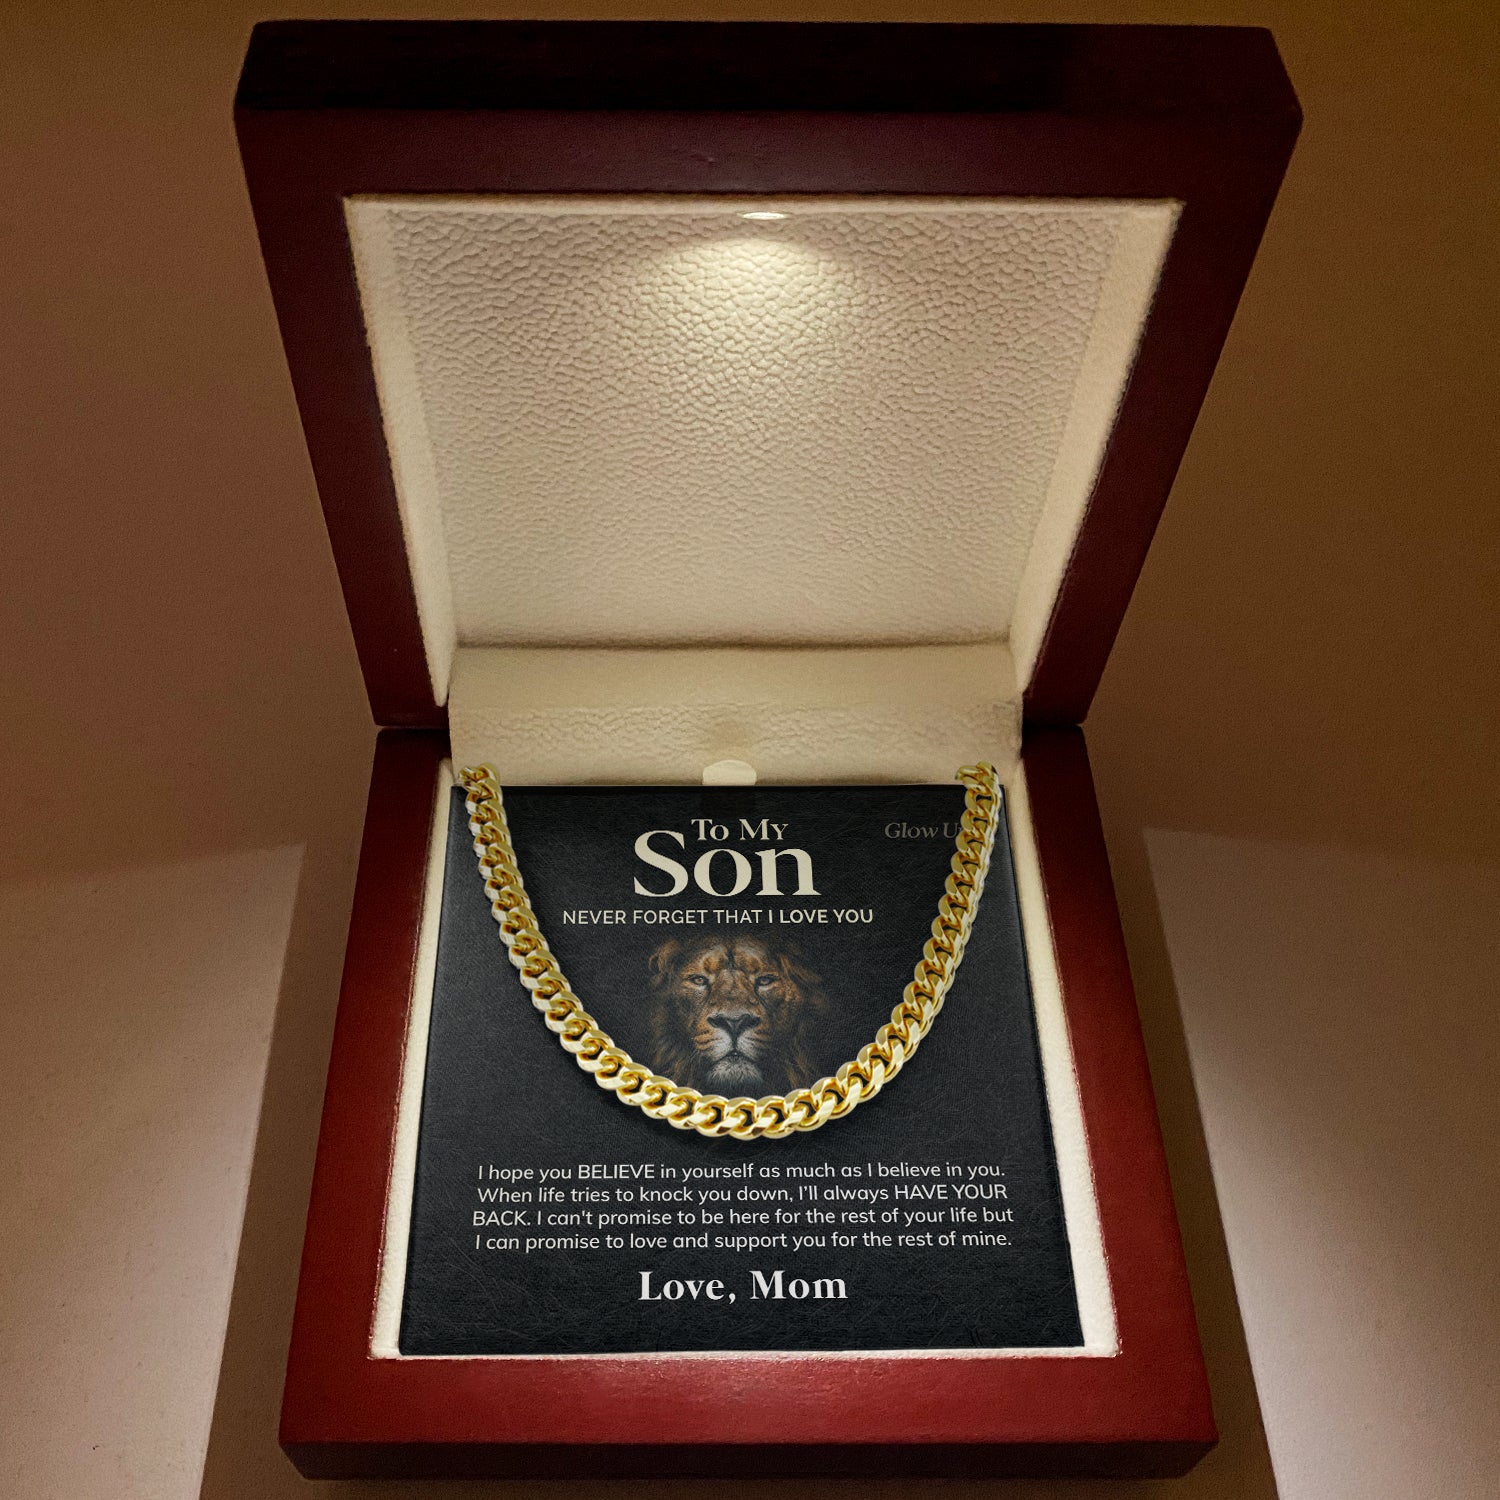 ShineOn Fulfillment Jewelry 14K Yellow Gold Finish / Luxury Box To My Son - I Believe in you - Cuban Link Chain